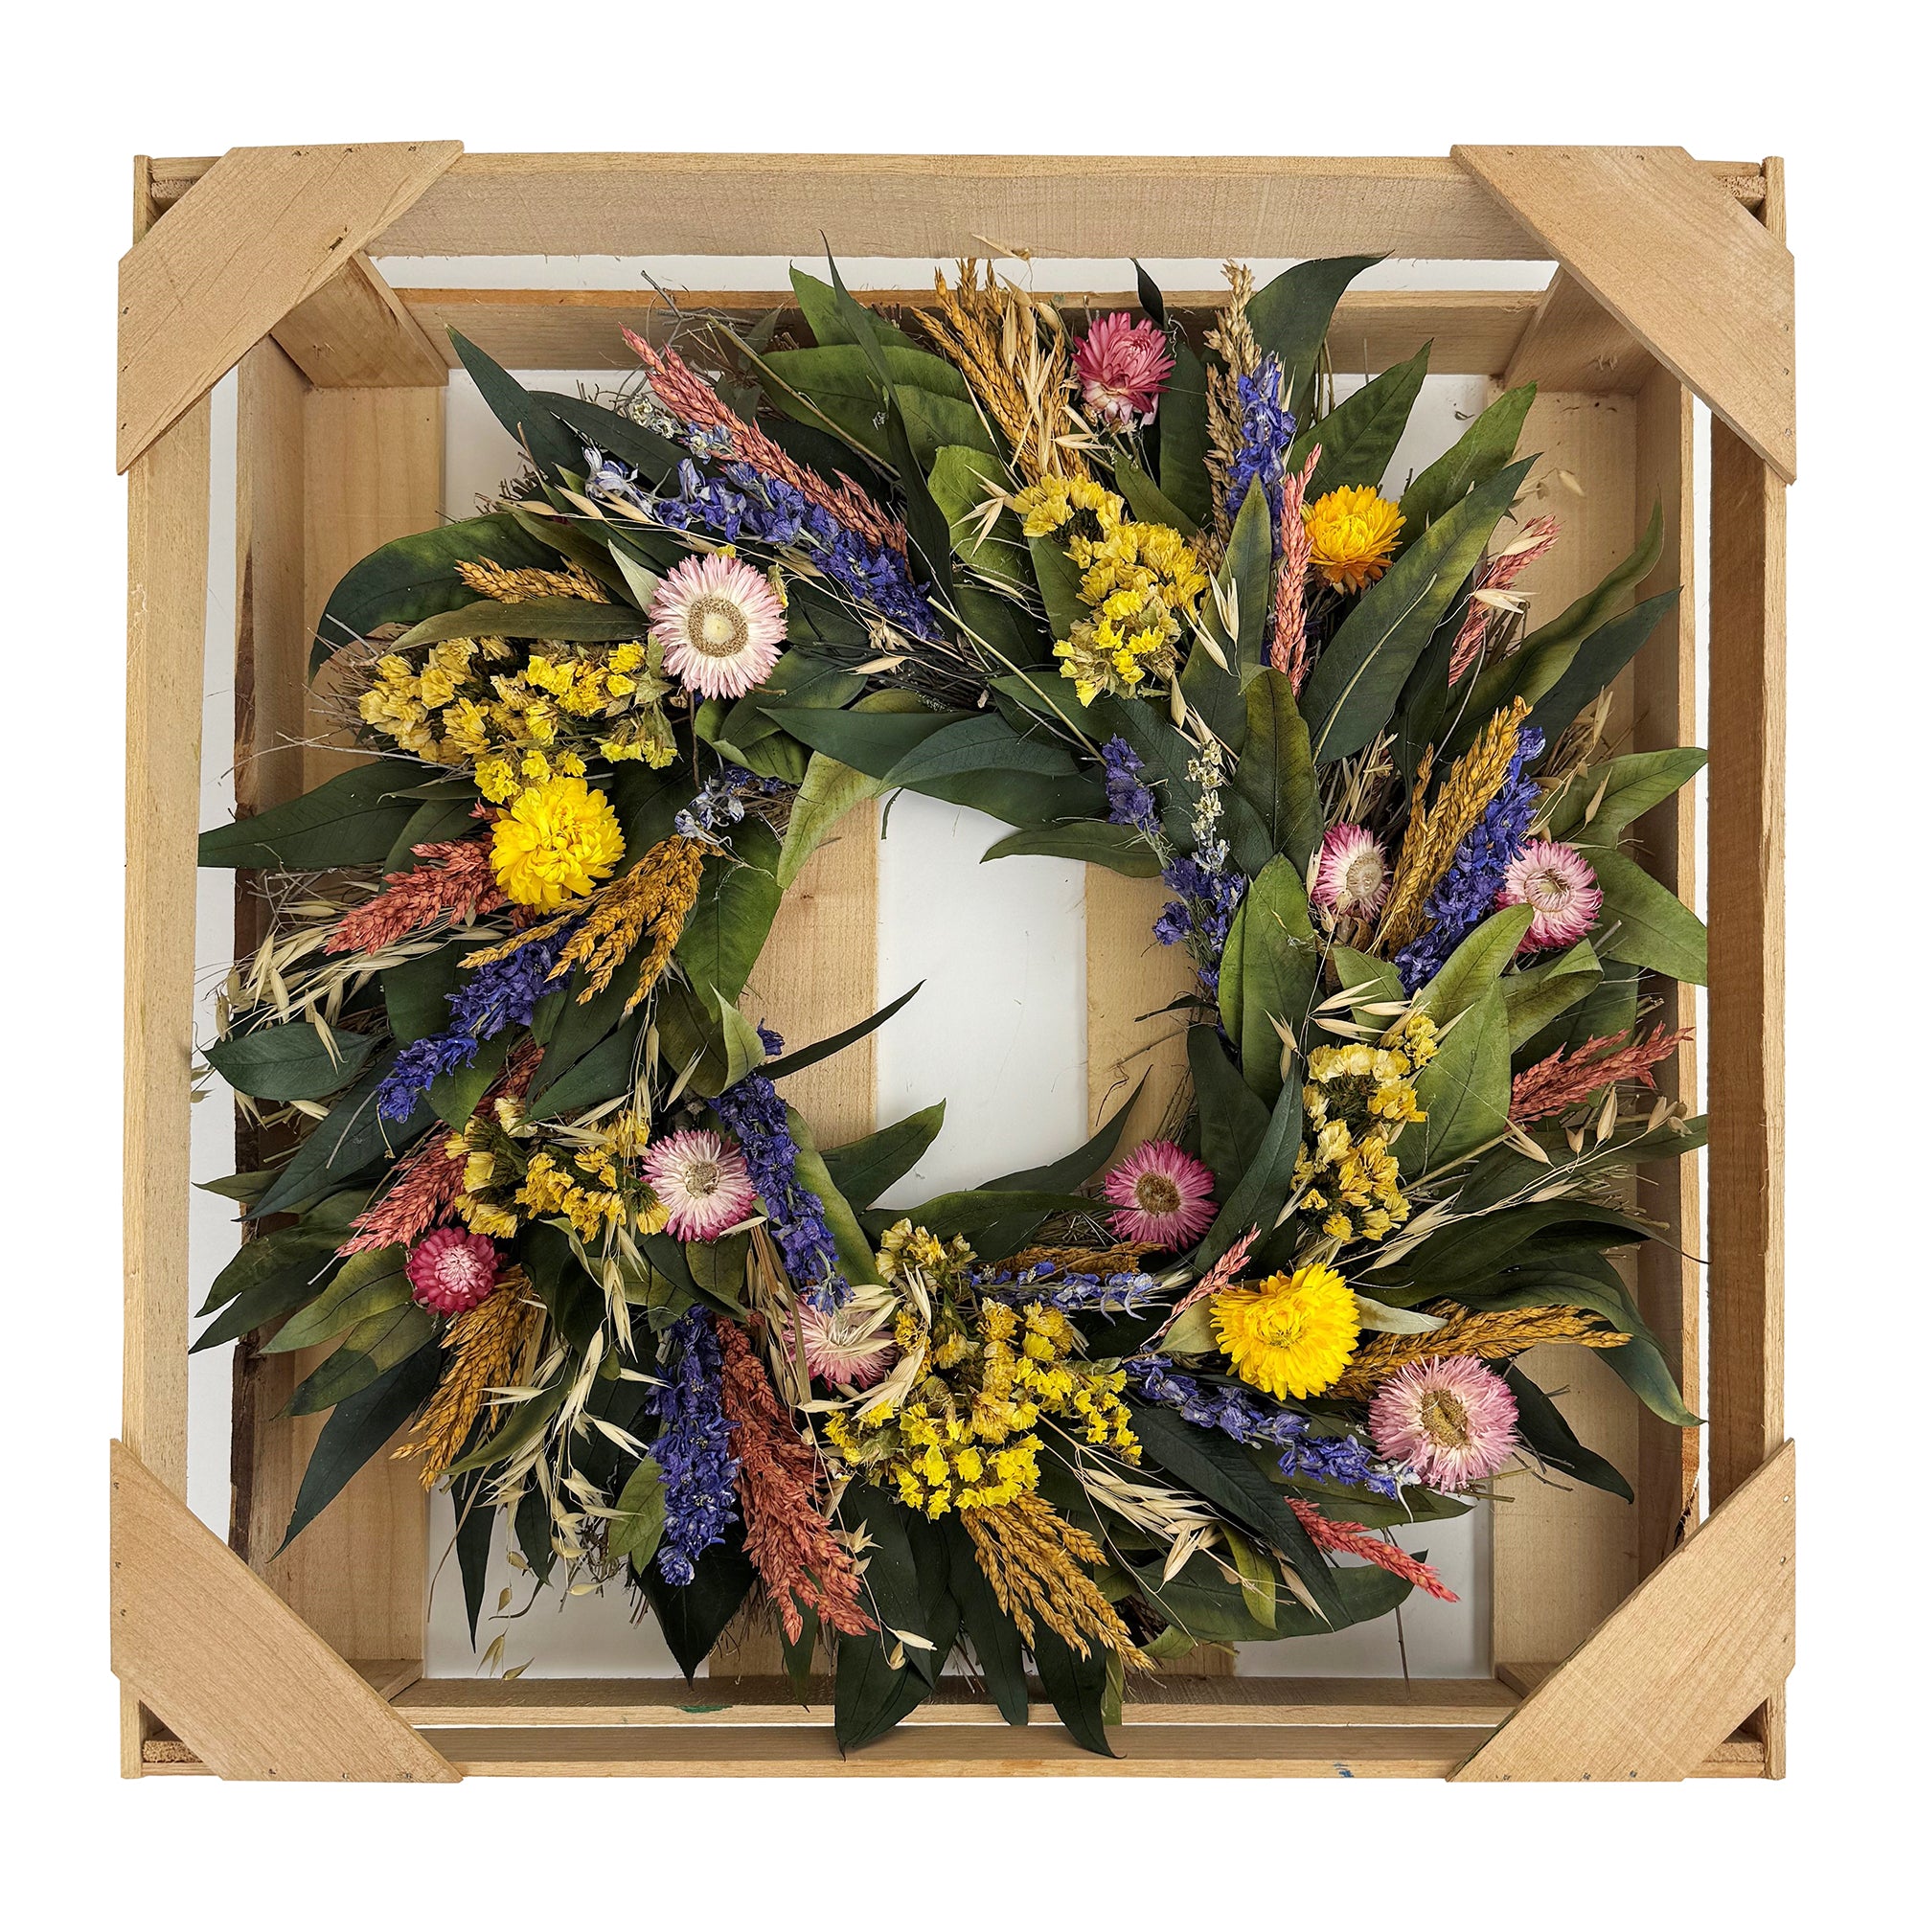 Cambria Wreath with bright colored dried flowers and leaves.